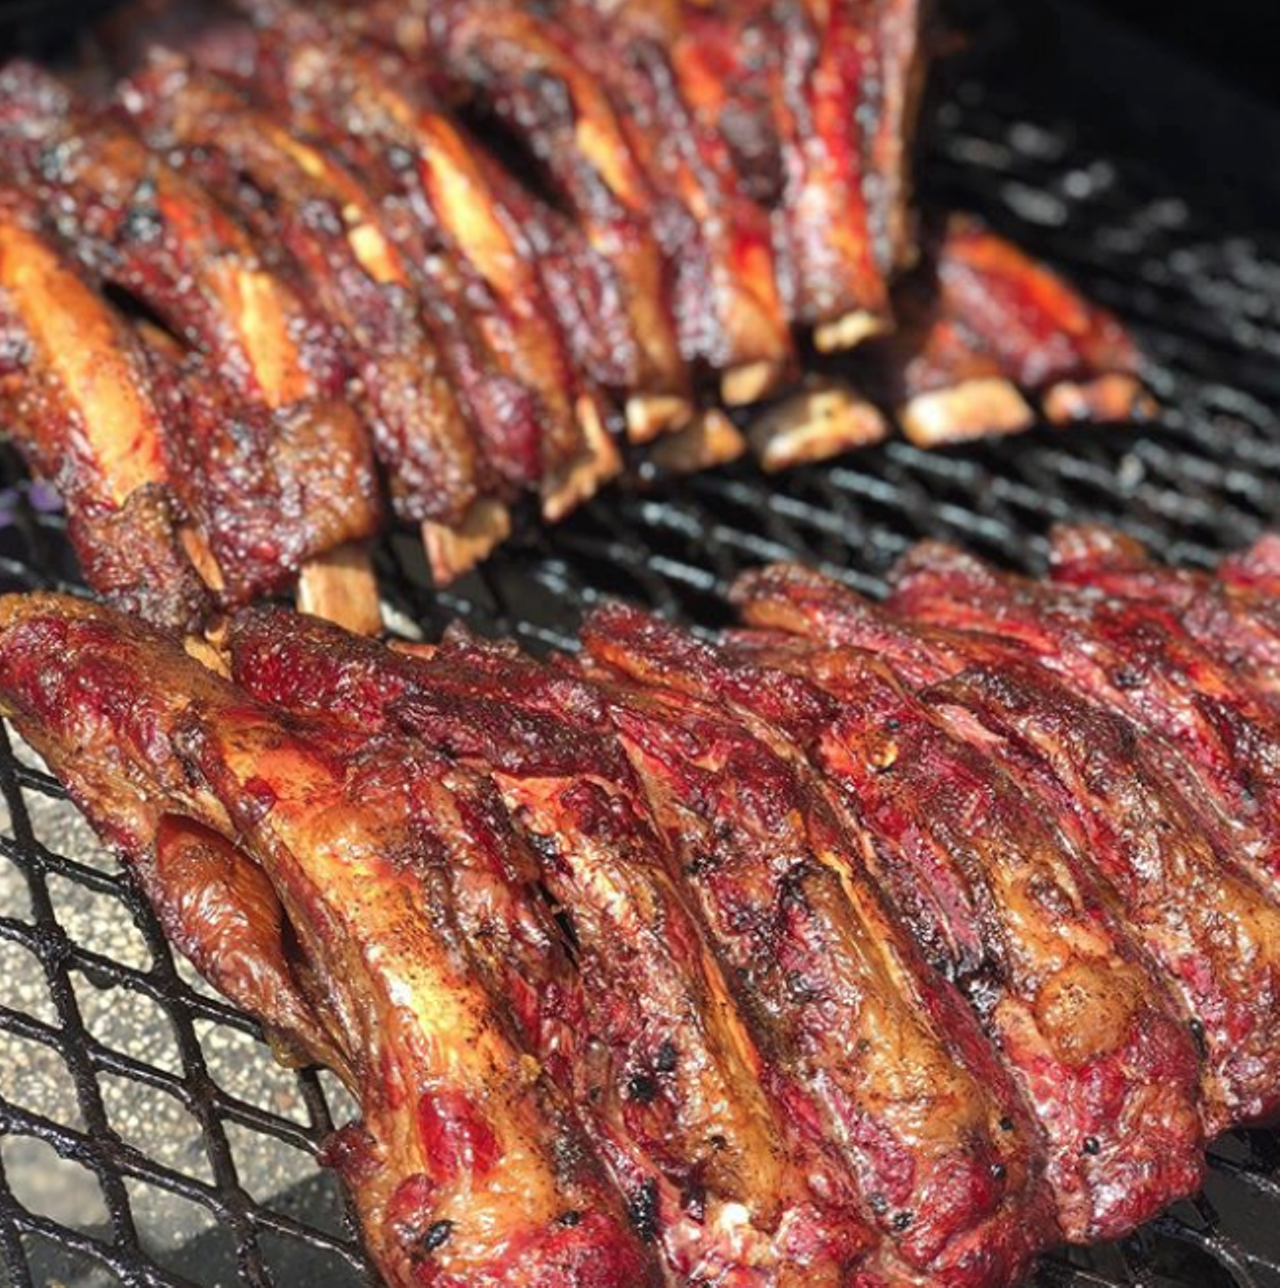 The Purple Pig BBQ
Various locations, (210) 442-8246, thepurplepigbbq.com
Specializing in Midwest-style BBQ with a Texas twist, Purple Pig BBQ takes their meats — and specialty sides — very seriously. Honestly though, what else would you expect with veteran ownership and family ties?
Photo via Instagram / thepurplepigbbq